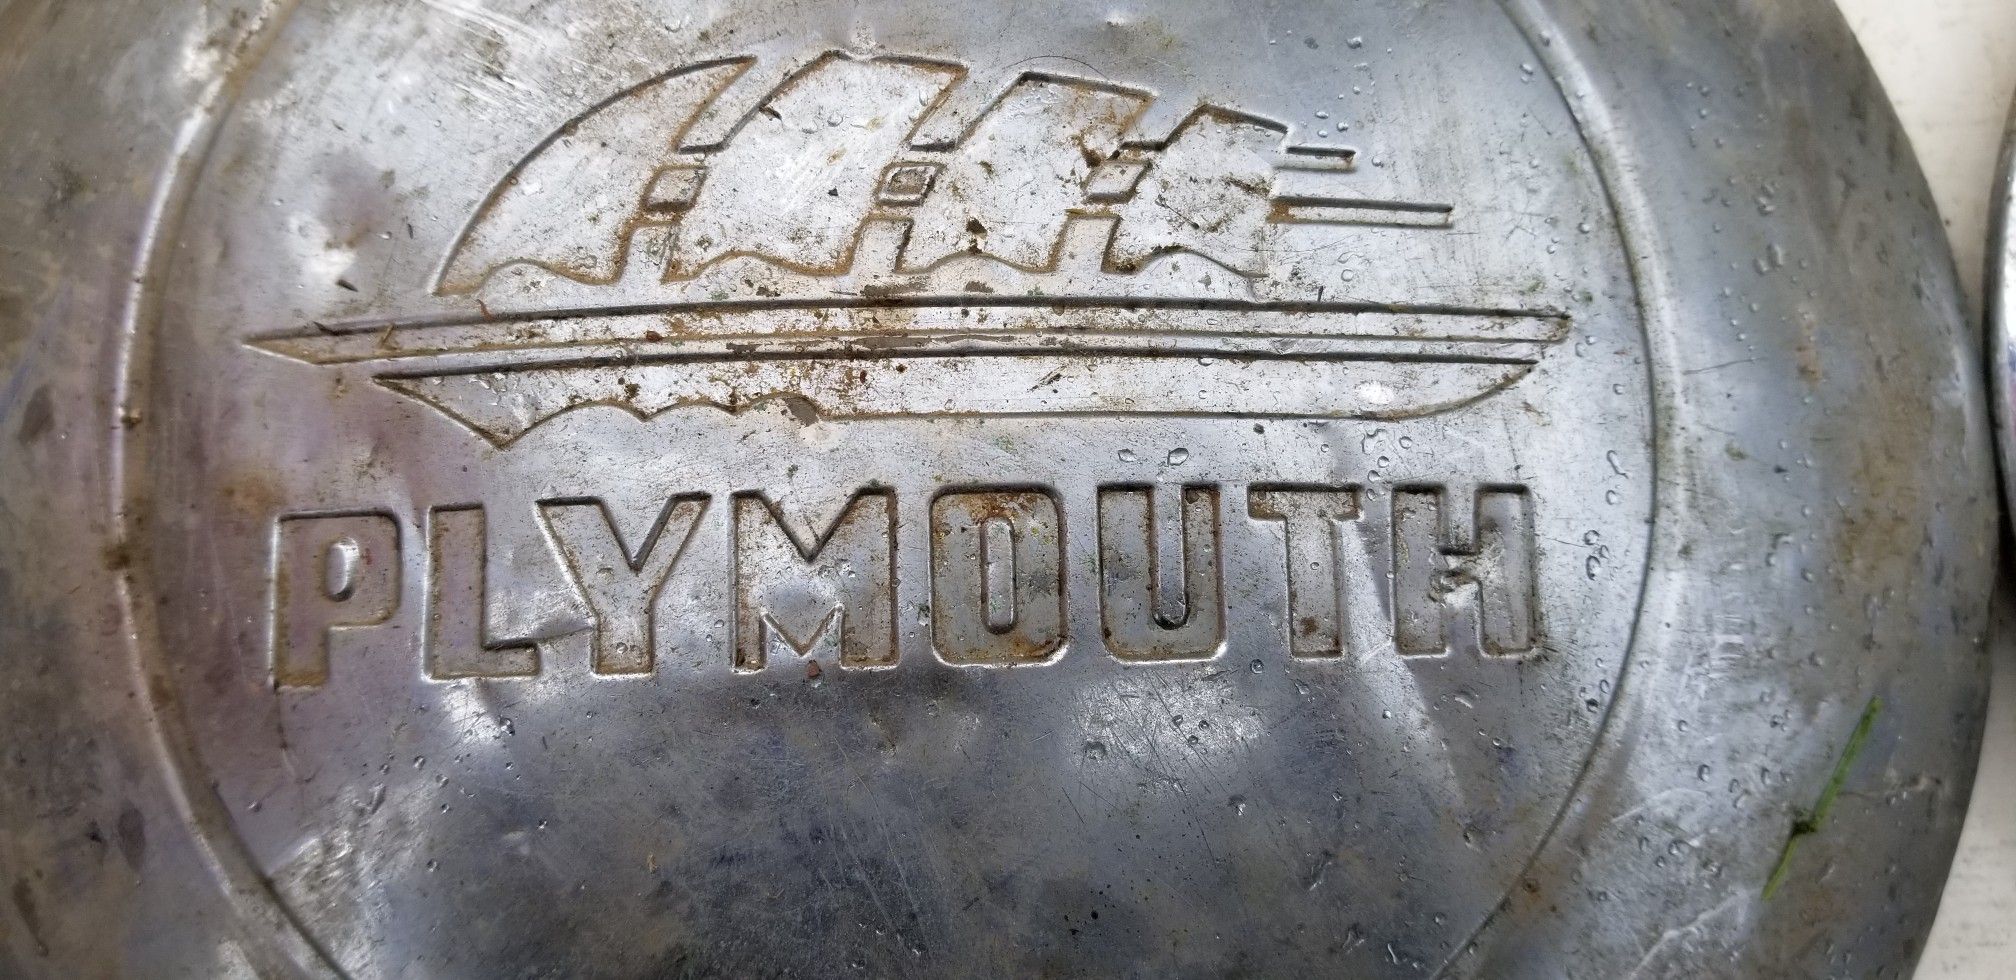 Vintage plymouth hubcaps